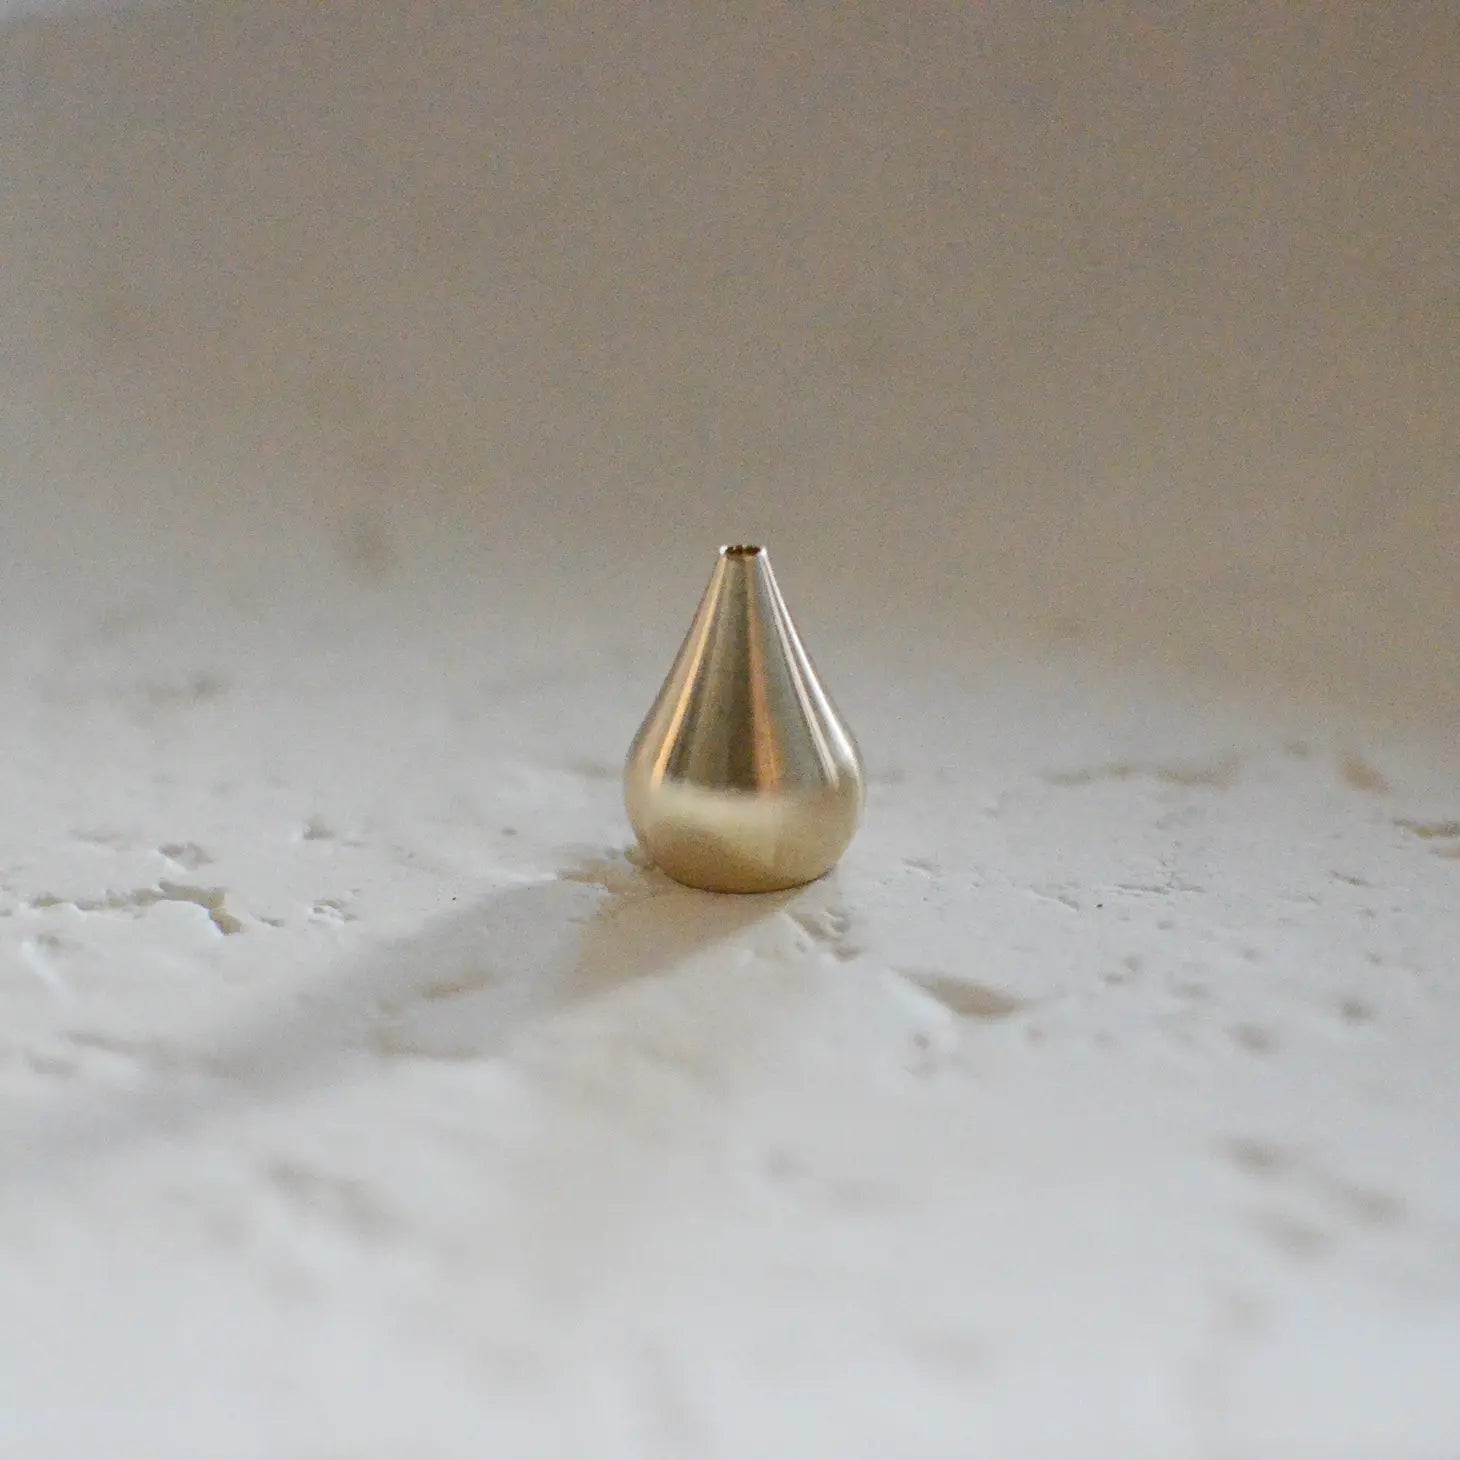 Small brass incense holder with pinched top